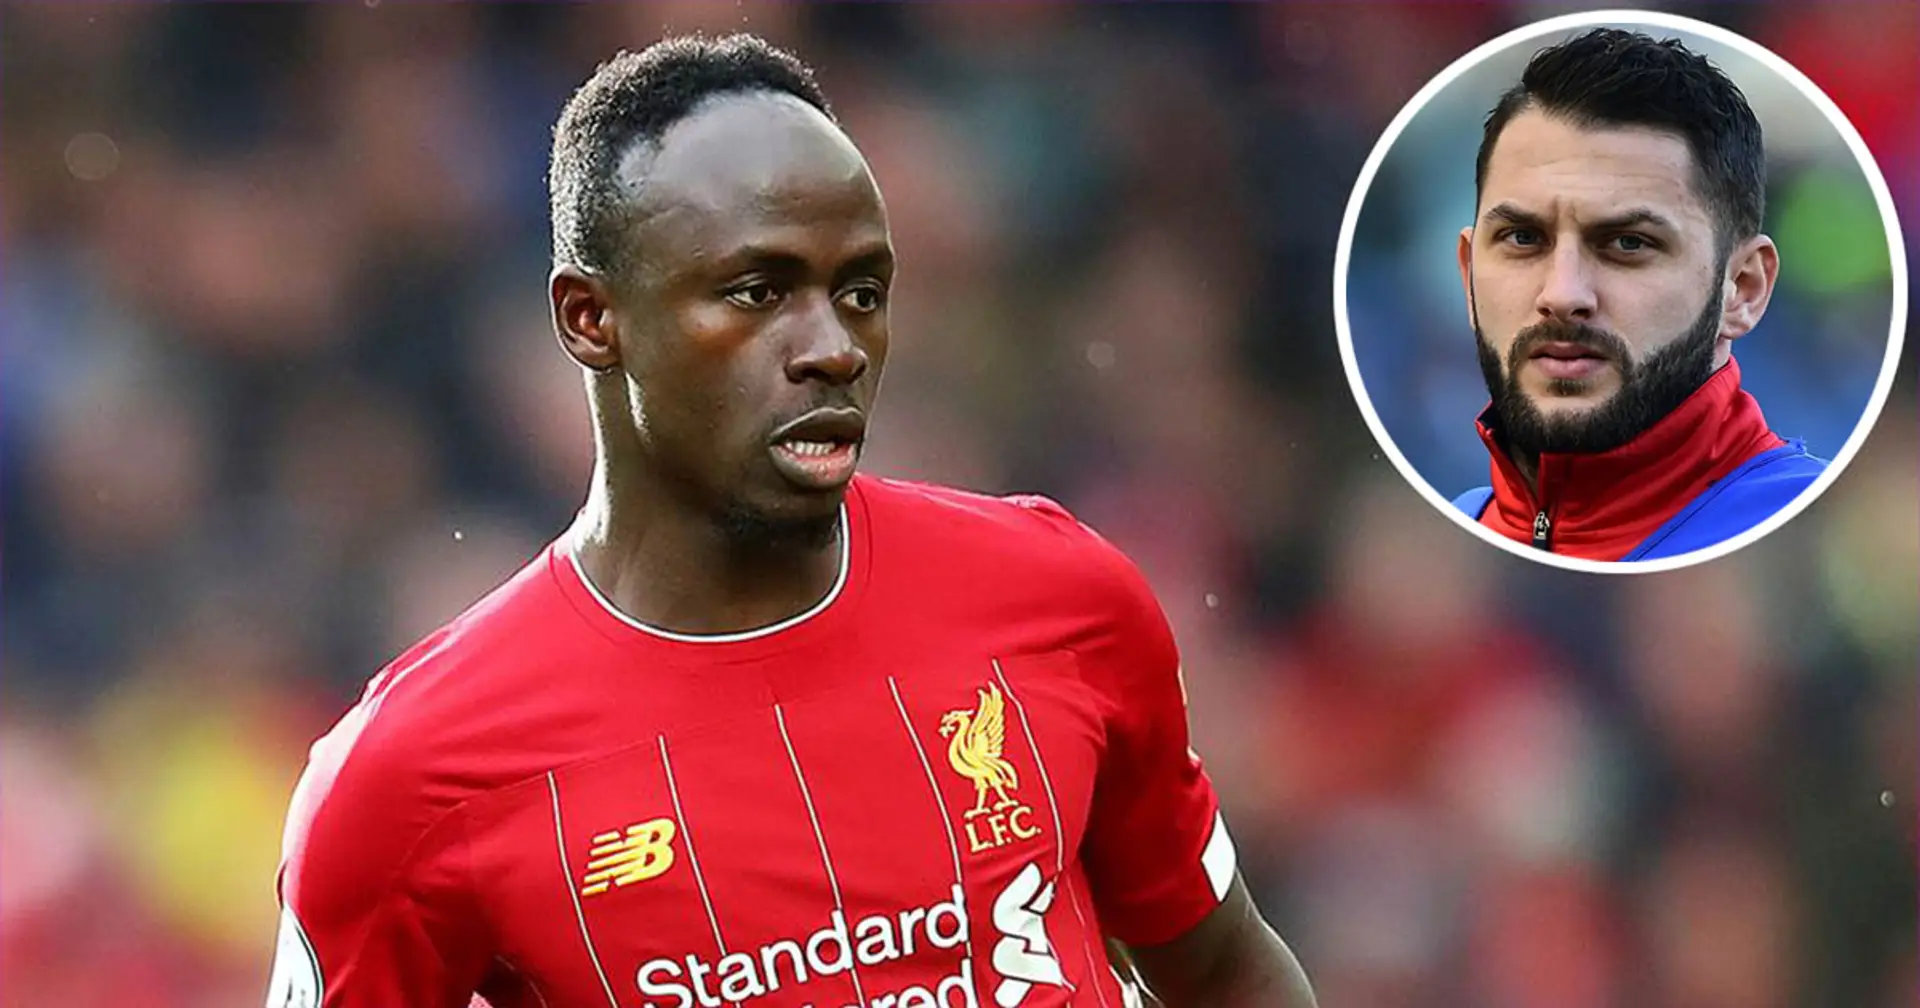 'Expensive cars and watches don't matter to him!': former opponent claims Sadio was destined to succeed at Liverpool